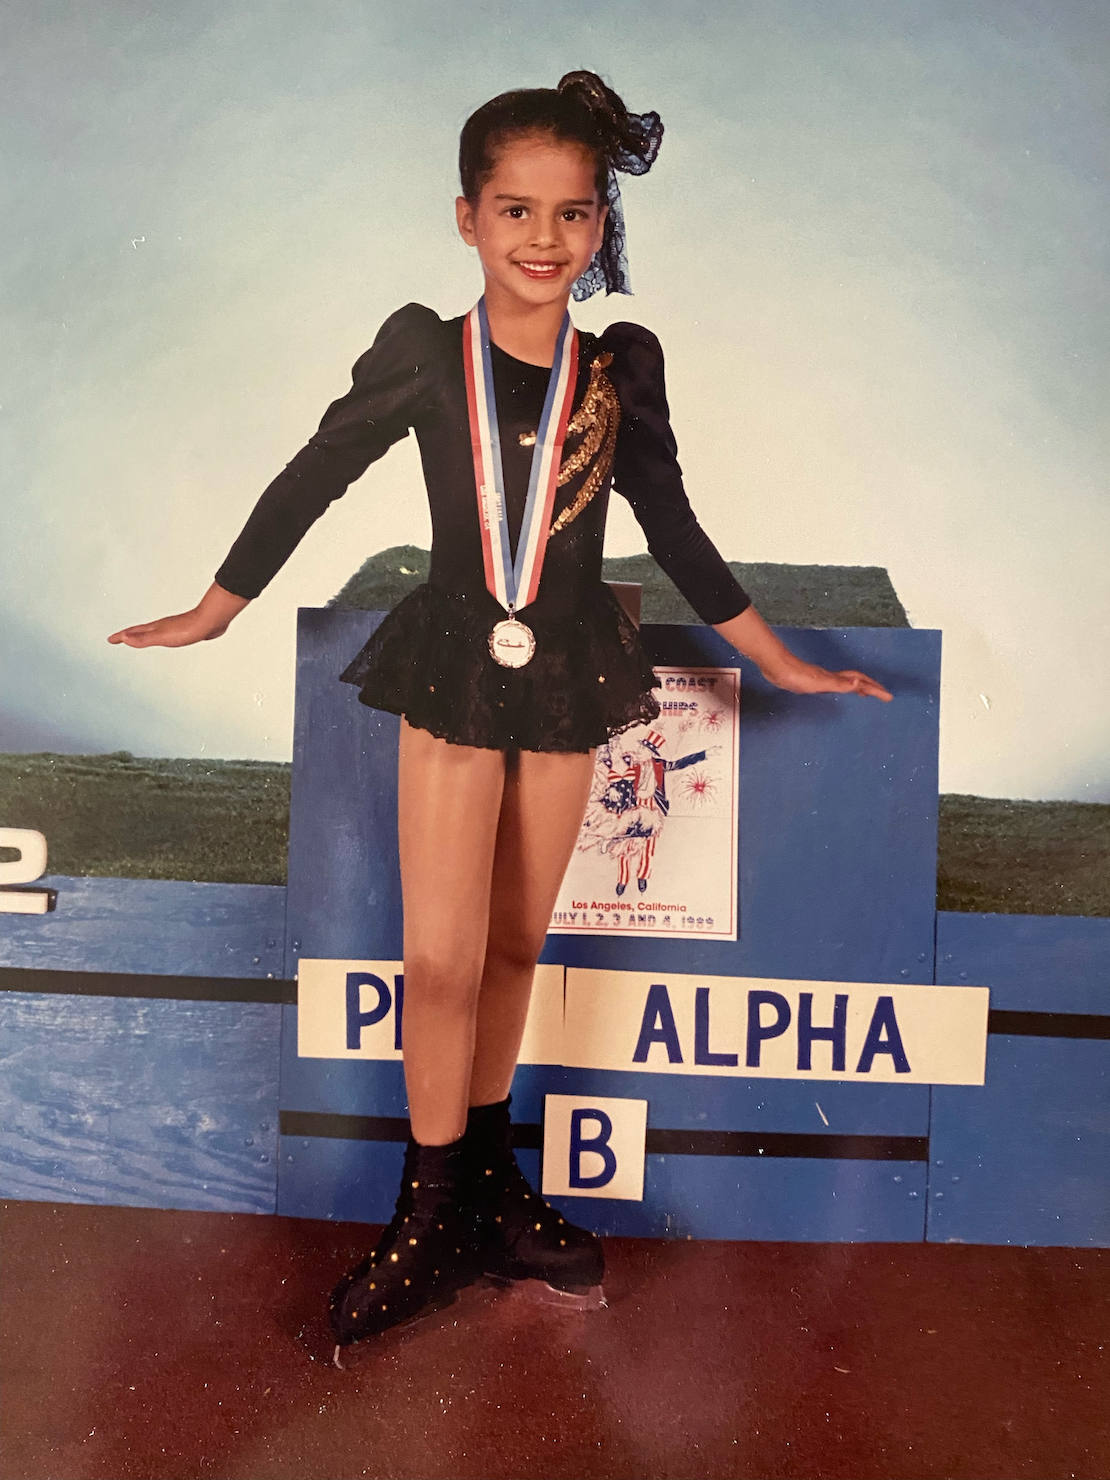 A young Harlyn Susarla, D.M.D., wins second place at her first figure skating competition.